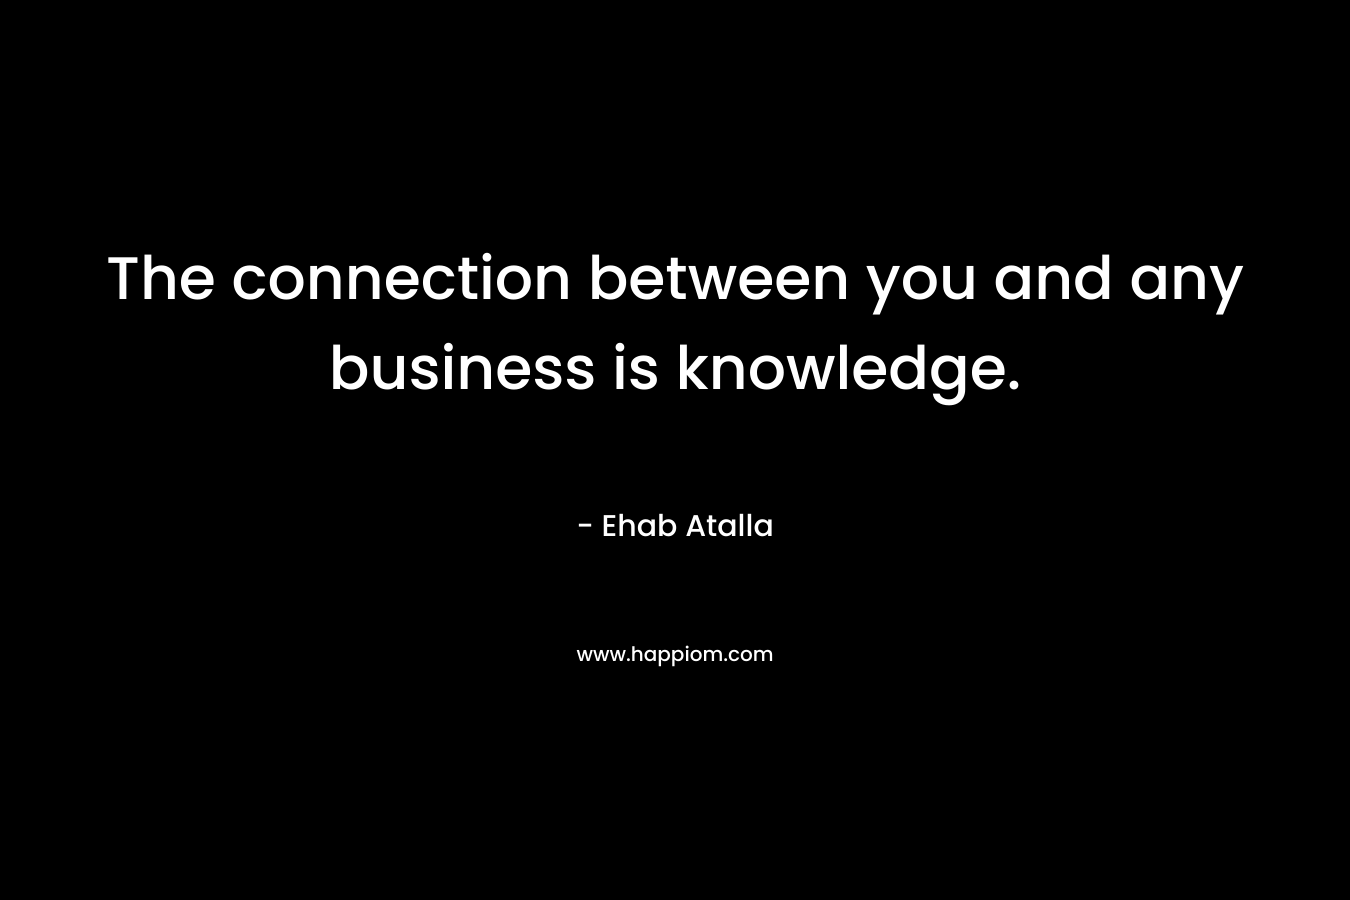 The connection between you and any business is knowledge.